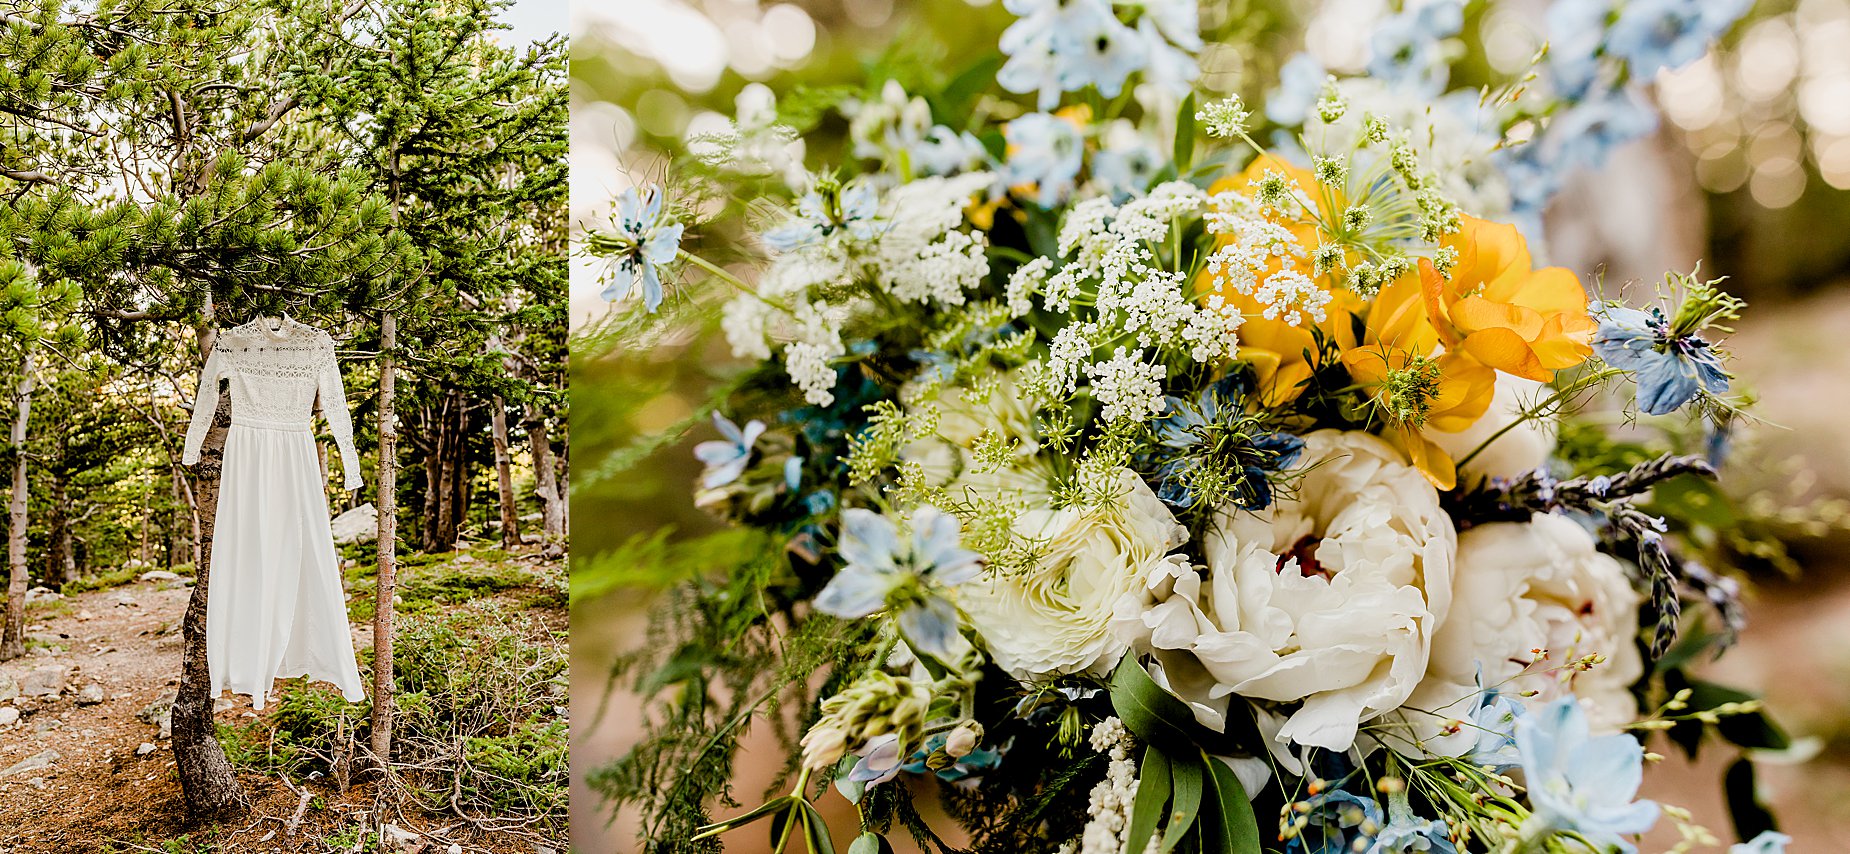 brides dress is hanging in a tree and gorgeous floral bouquet with blues and whites